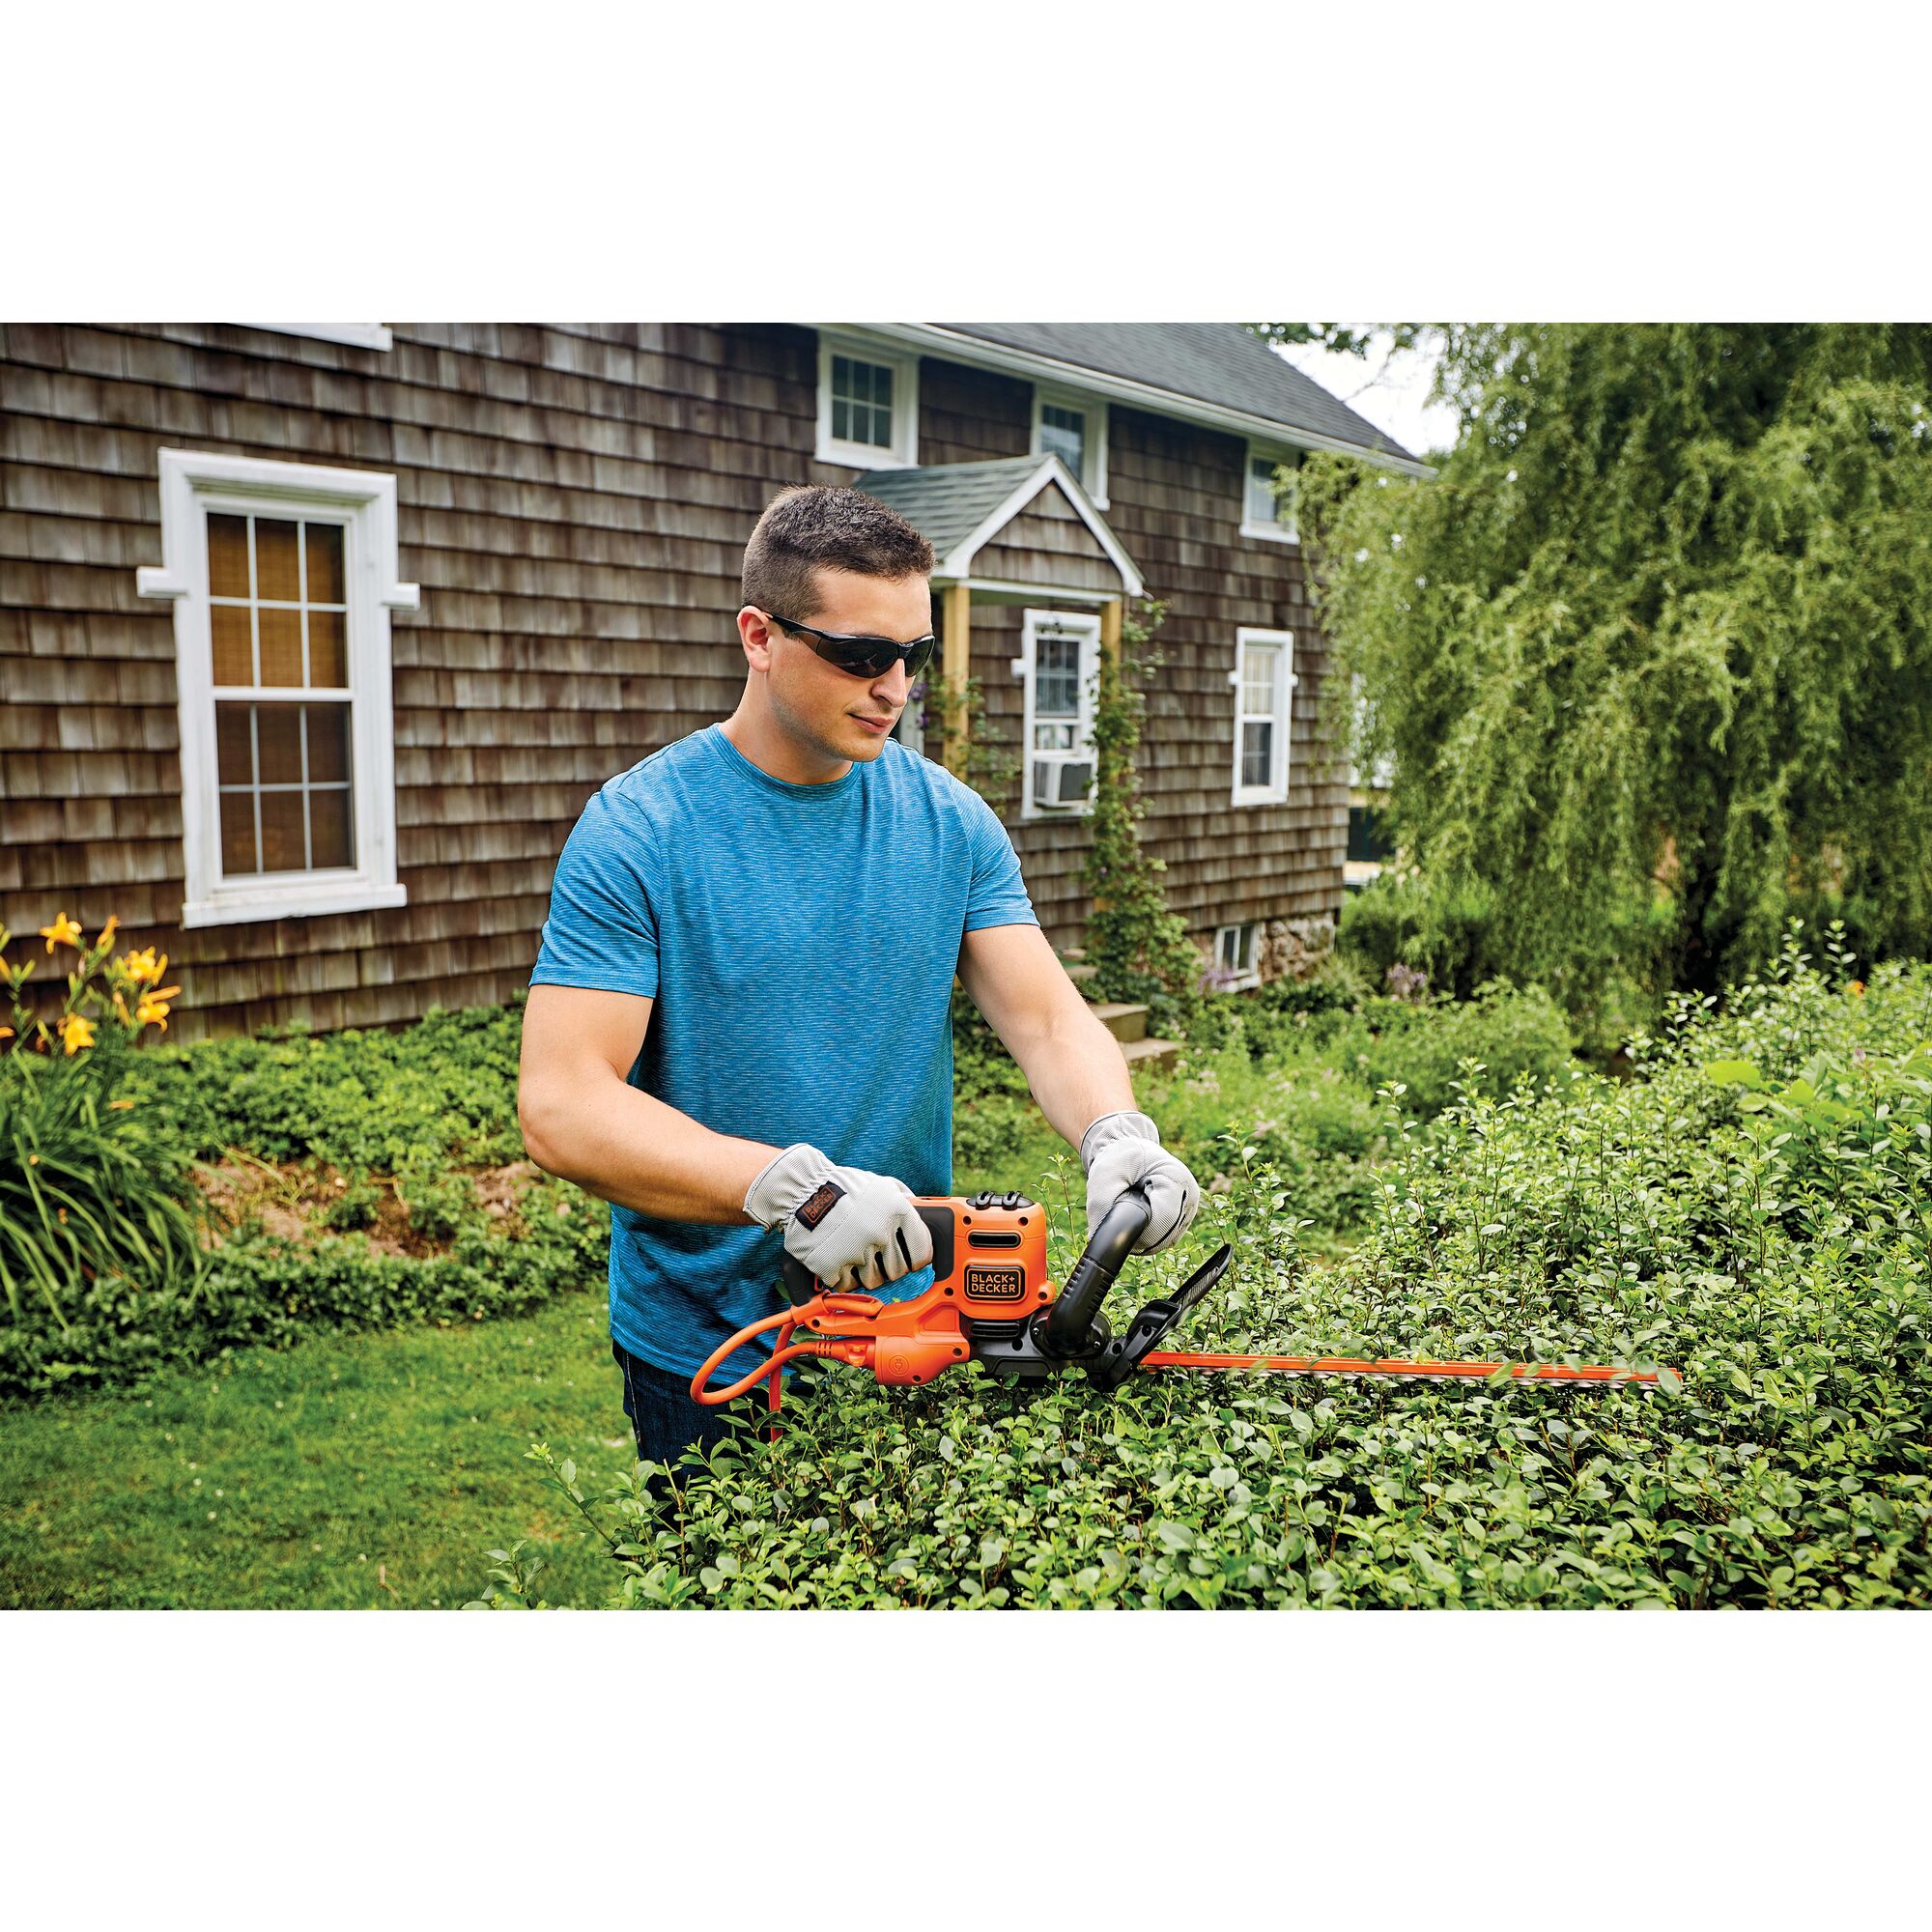 22 inch Electric Hedge Trimmer being used by a person on a hedge.